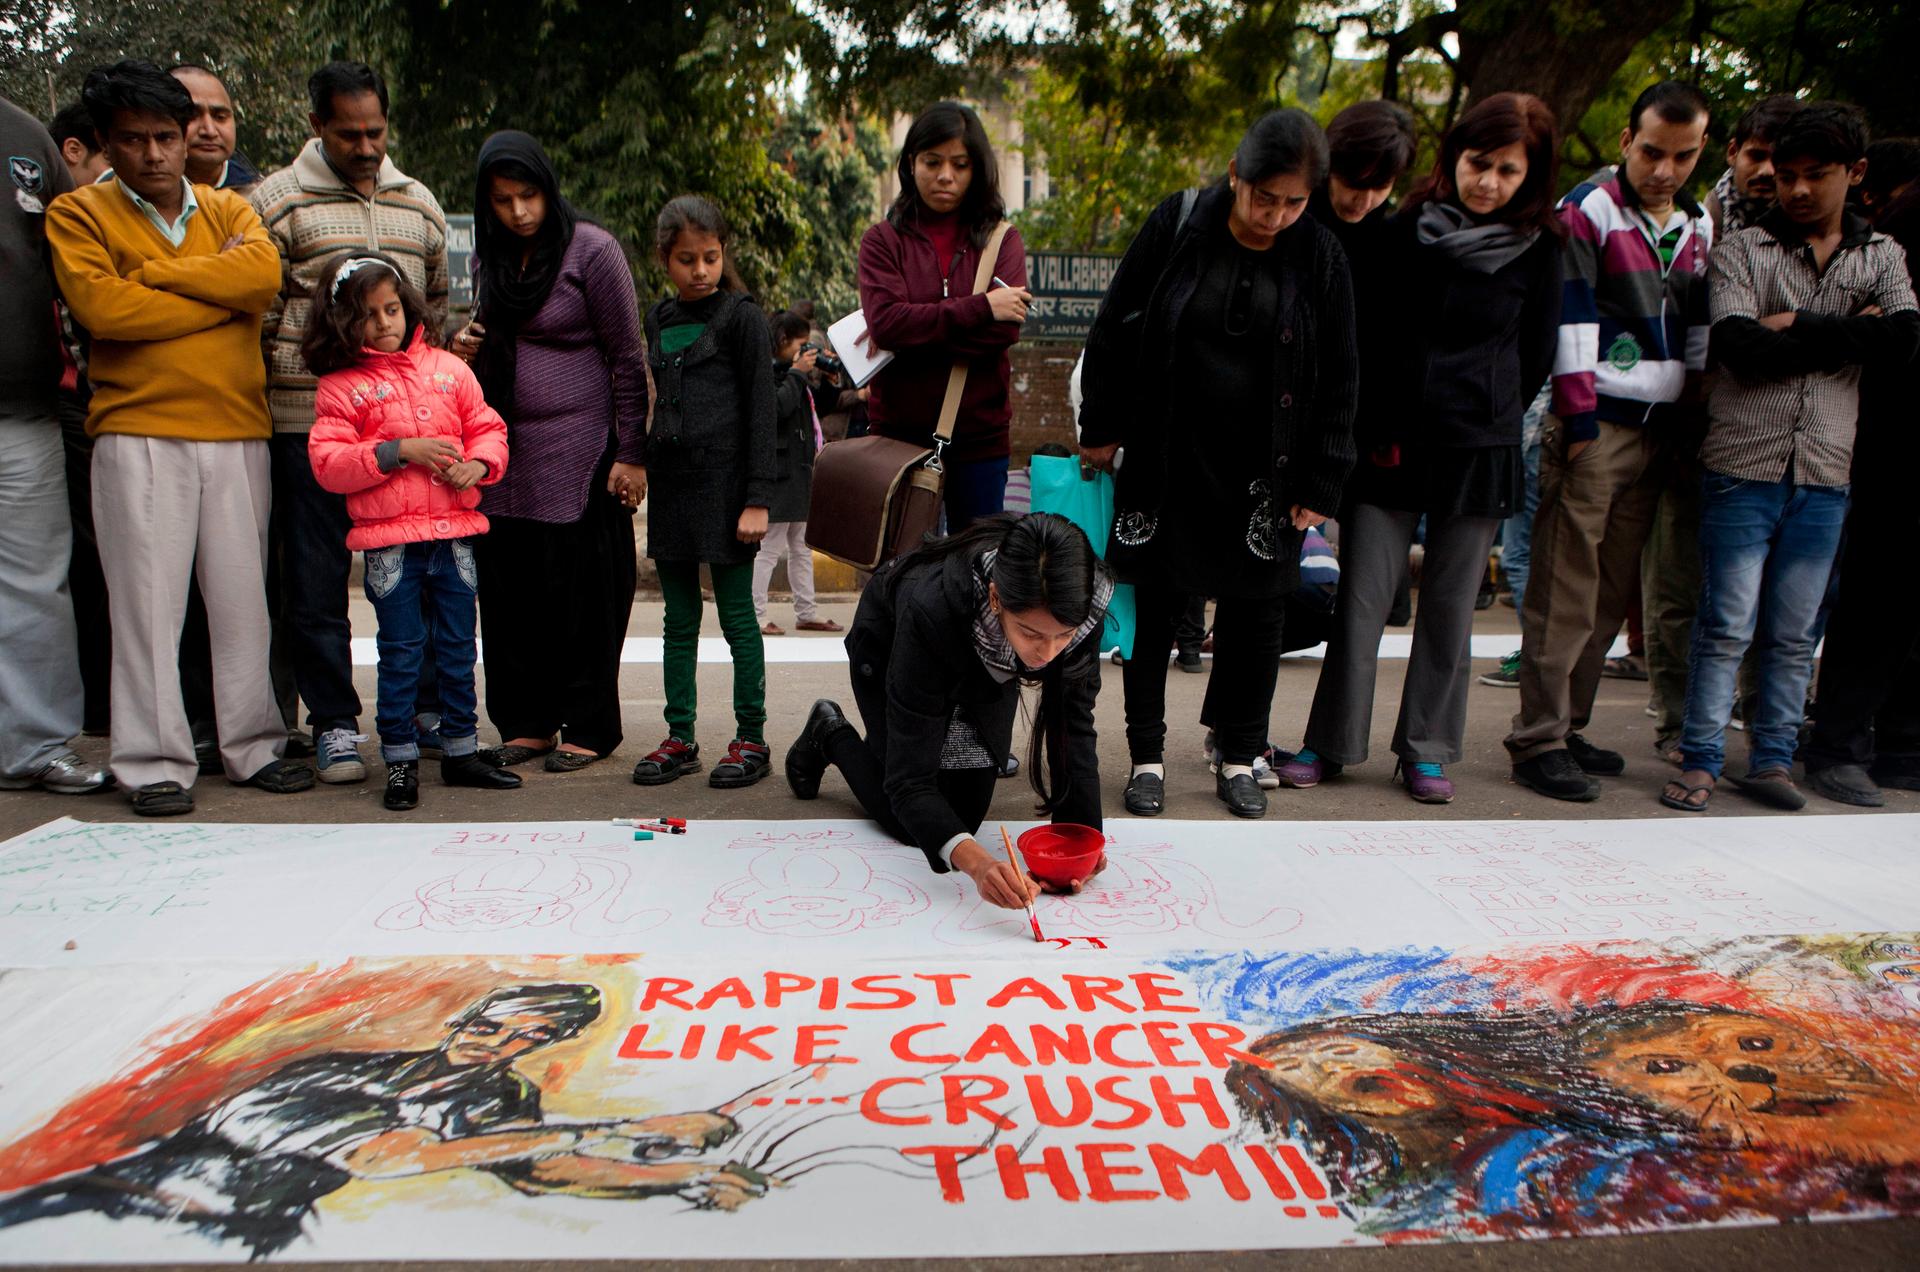 Indians watch a girl paint a message during a protest against the death of a young woman who was recently gang-raped, in New Delhi, India, Dec. 30, 2012.